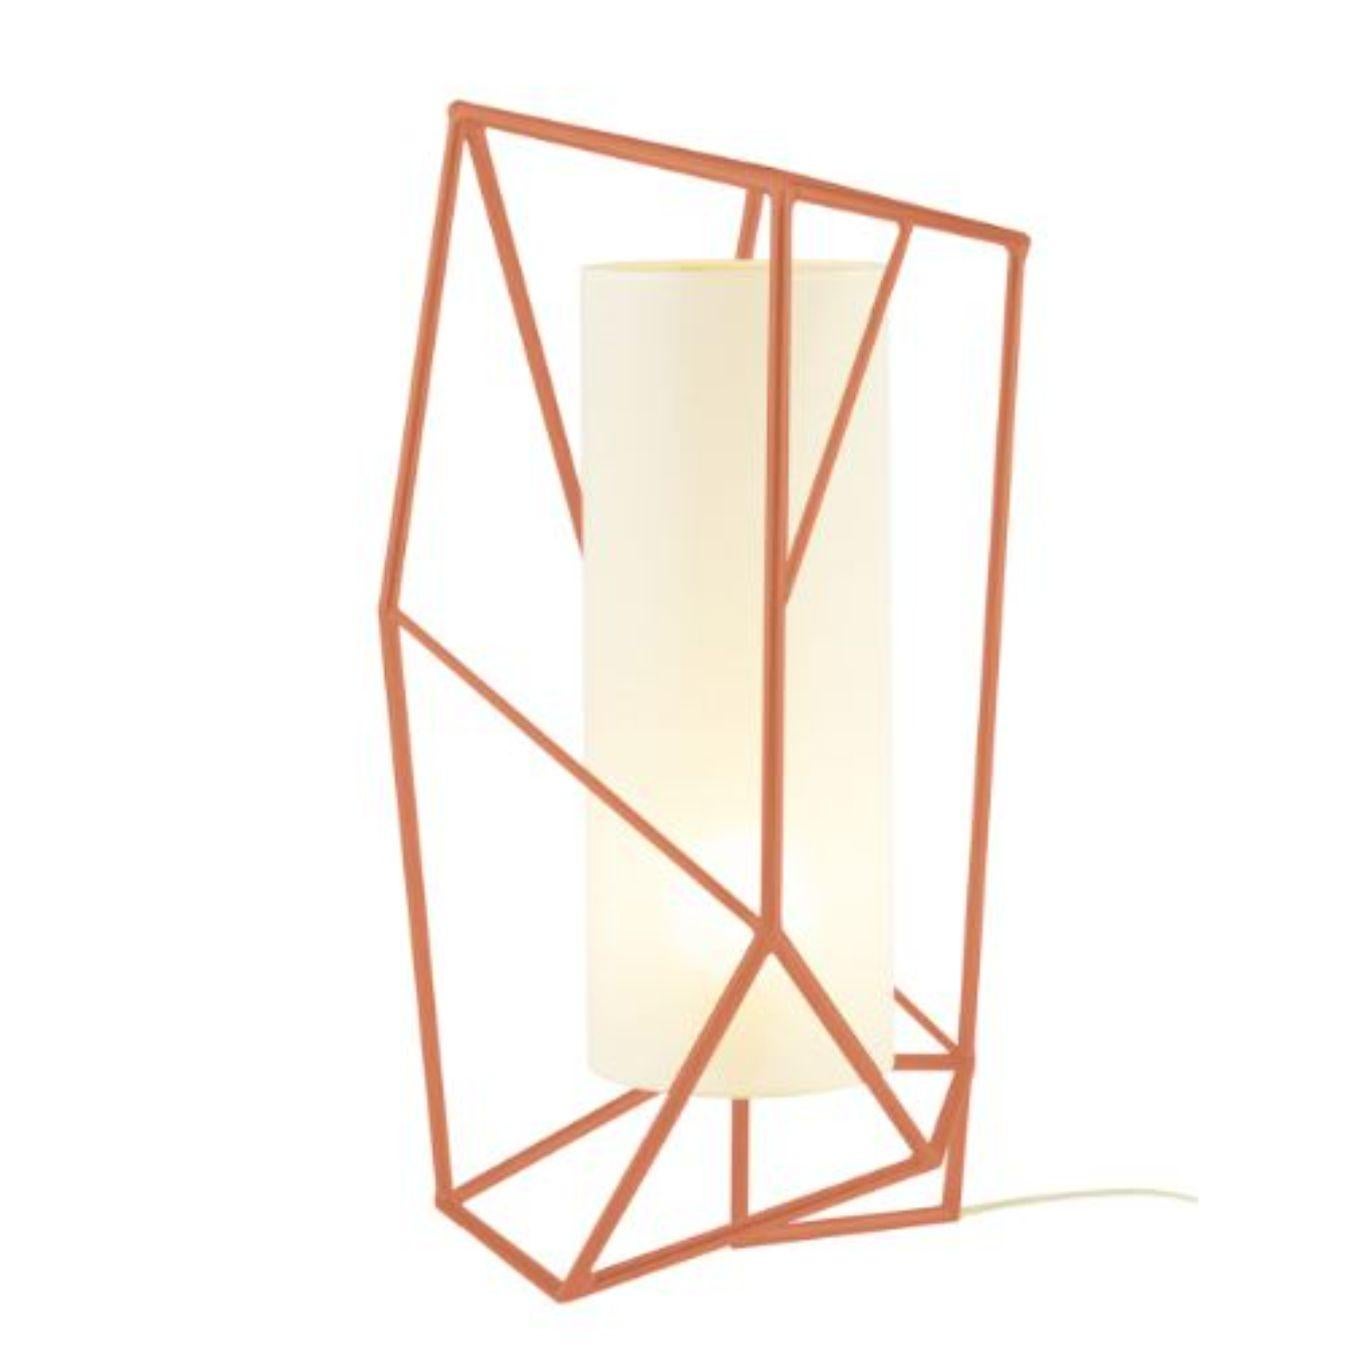 Salmon Star table lamp by Dooq.
Dimensions: W 33 x D 33 x H 72 cm.
Materials: lacquered metal, polished or satin metal.
abat-jour: linen
Also available in different colors and materials.

Information:
230V/50Hz
E27/1x10W